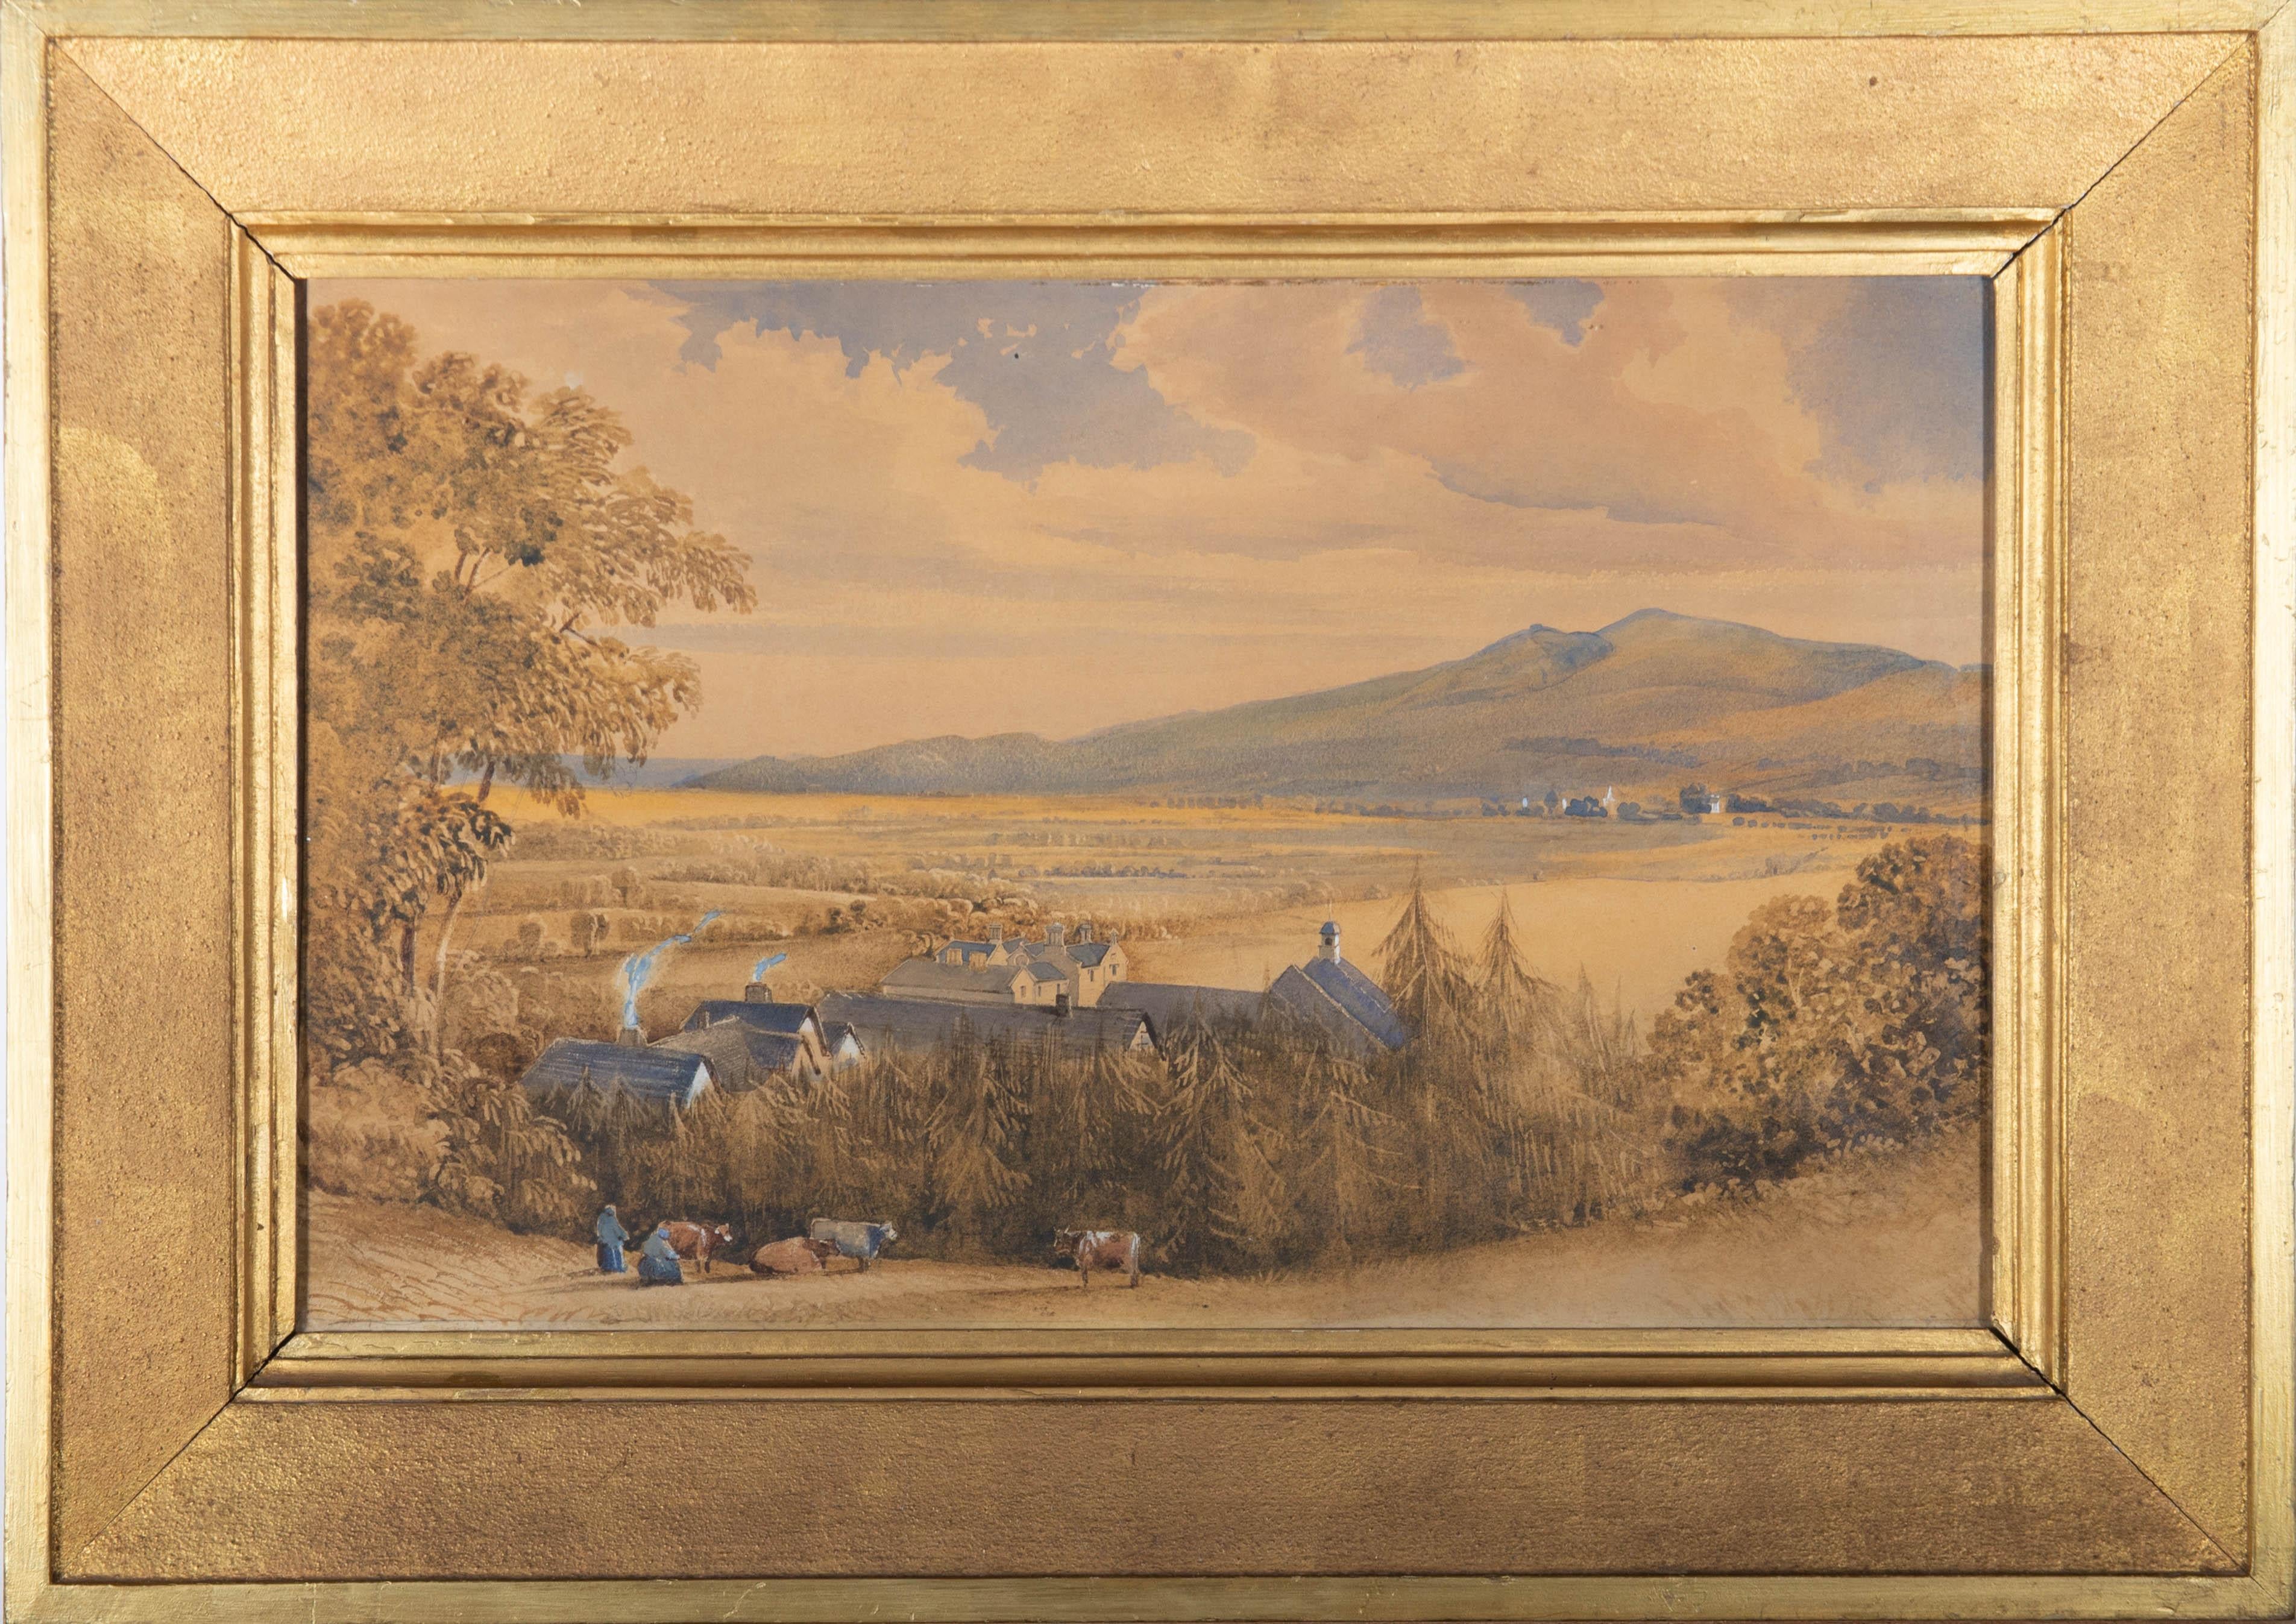 Unknown Landscape Art - Mid 19th Century Watercolour - Hamlet in the Valley